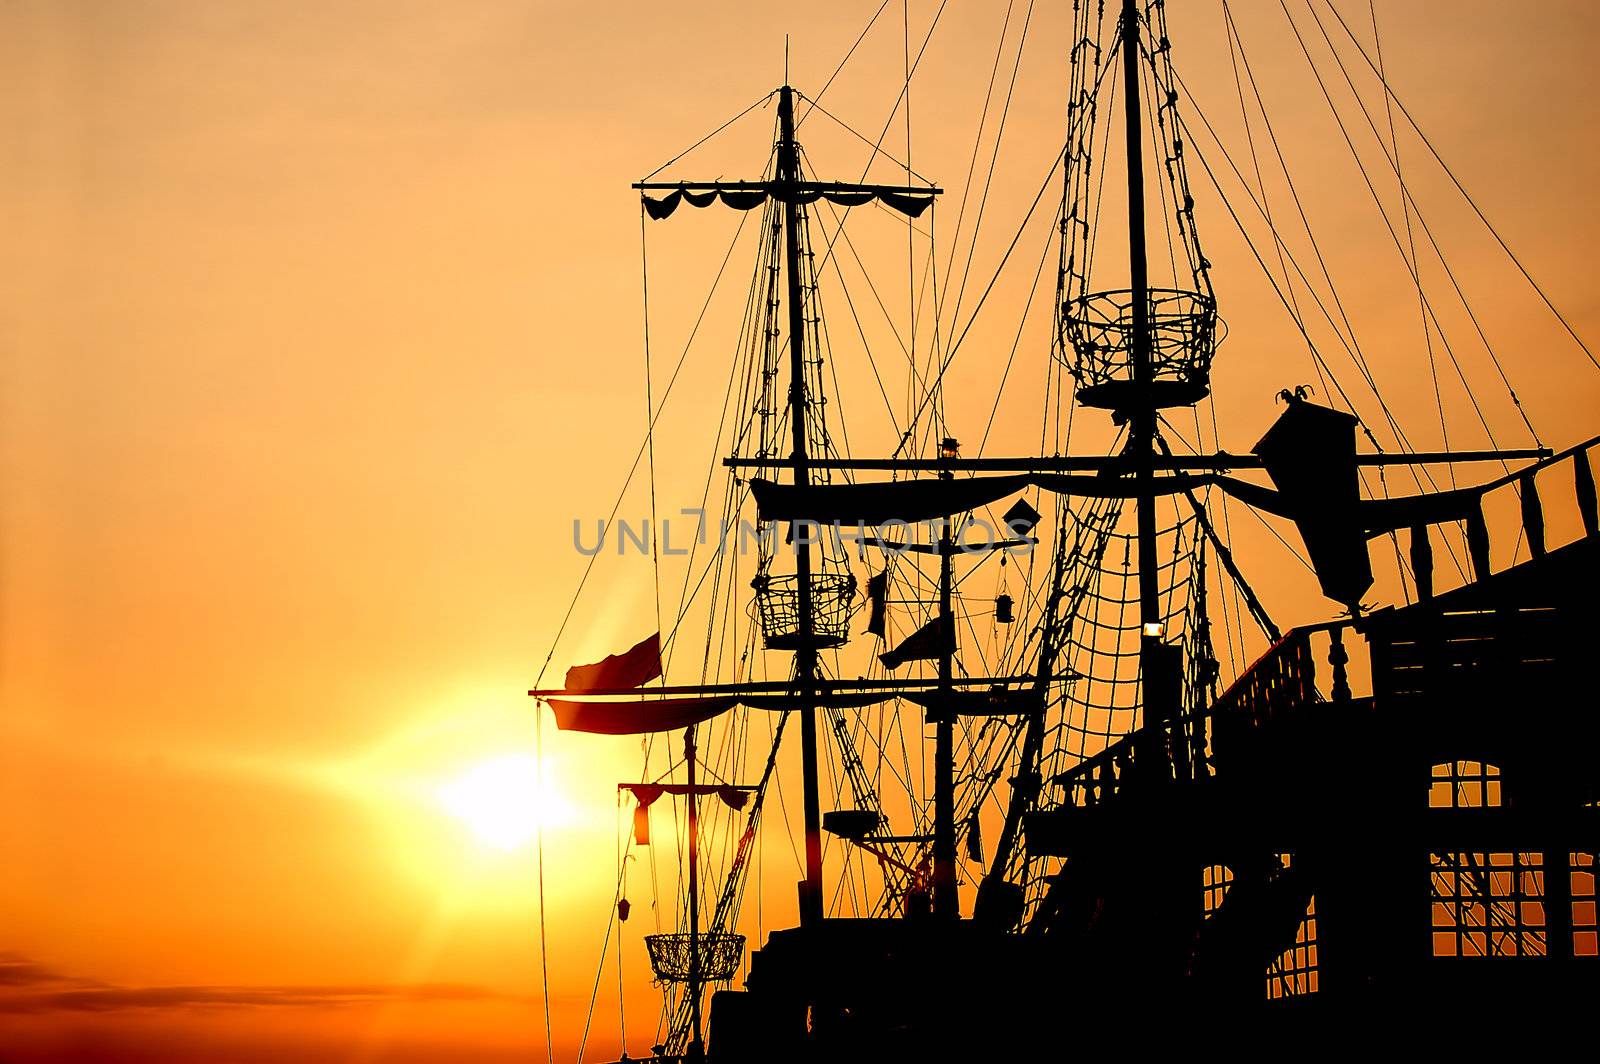 Pirate ship by photocreo